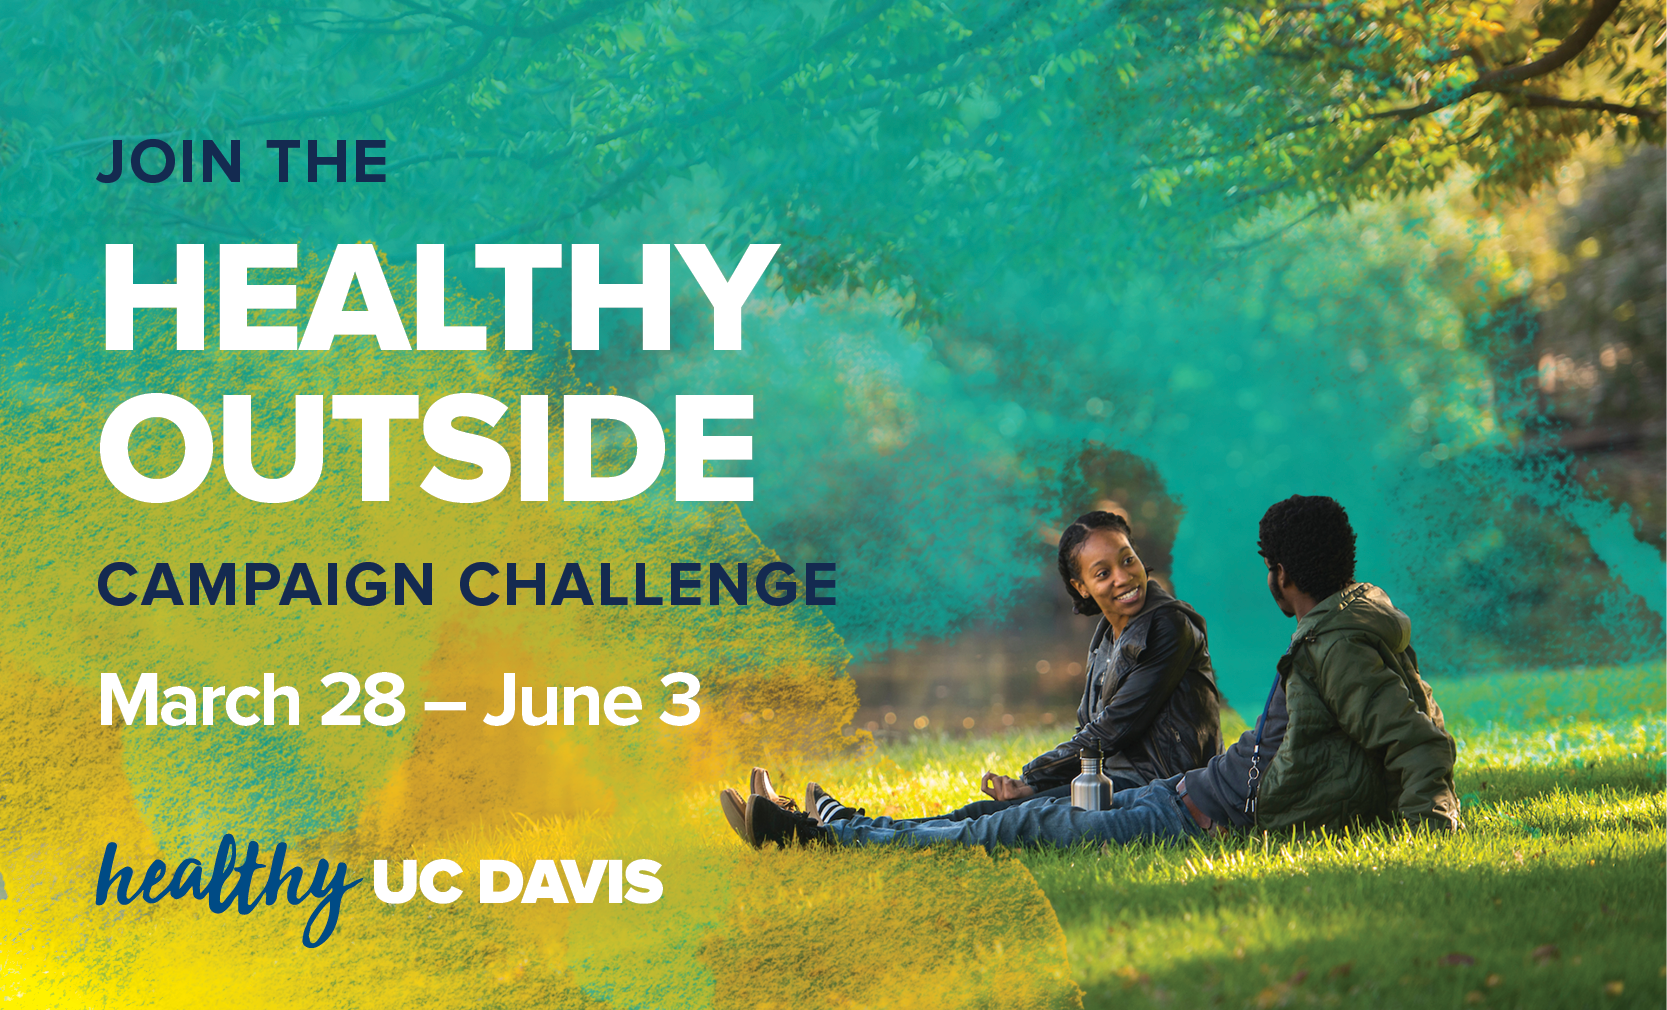 Link showing two visitors in the Arboretum that encourages people to participate in the Healthy Outside Campaign Challenge from March 28-June 3.